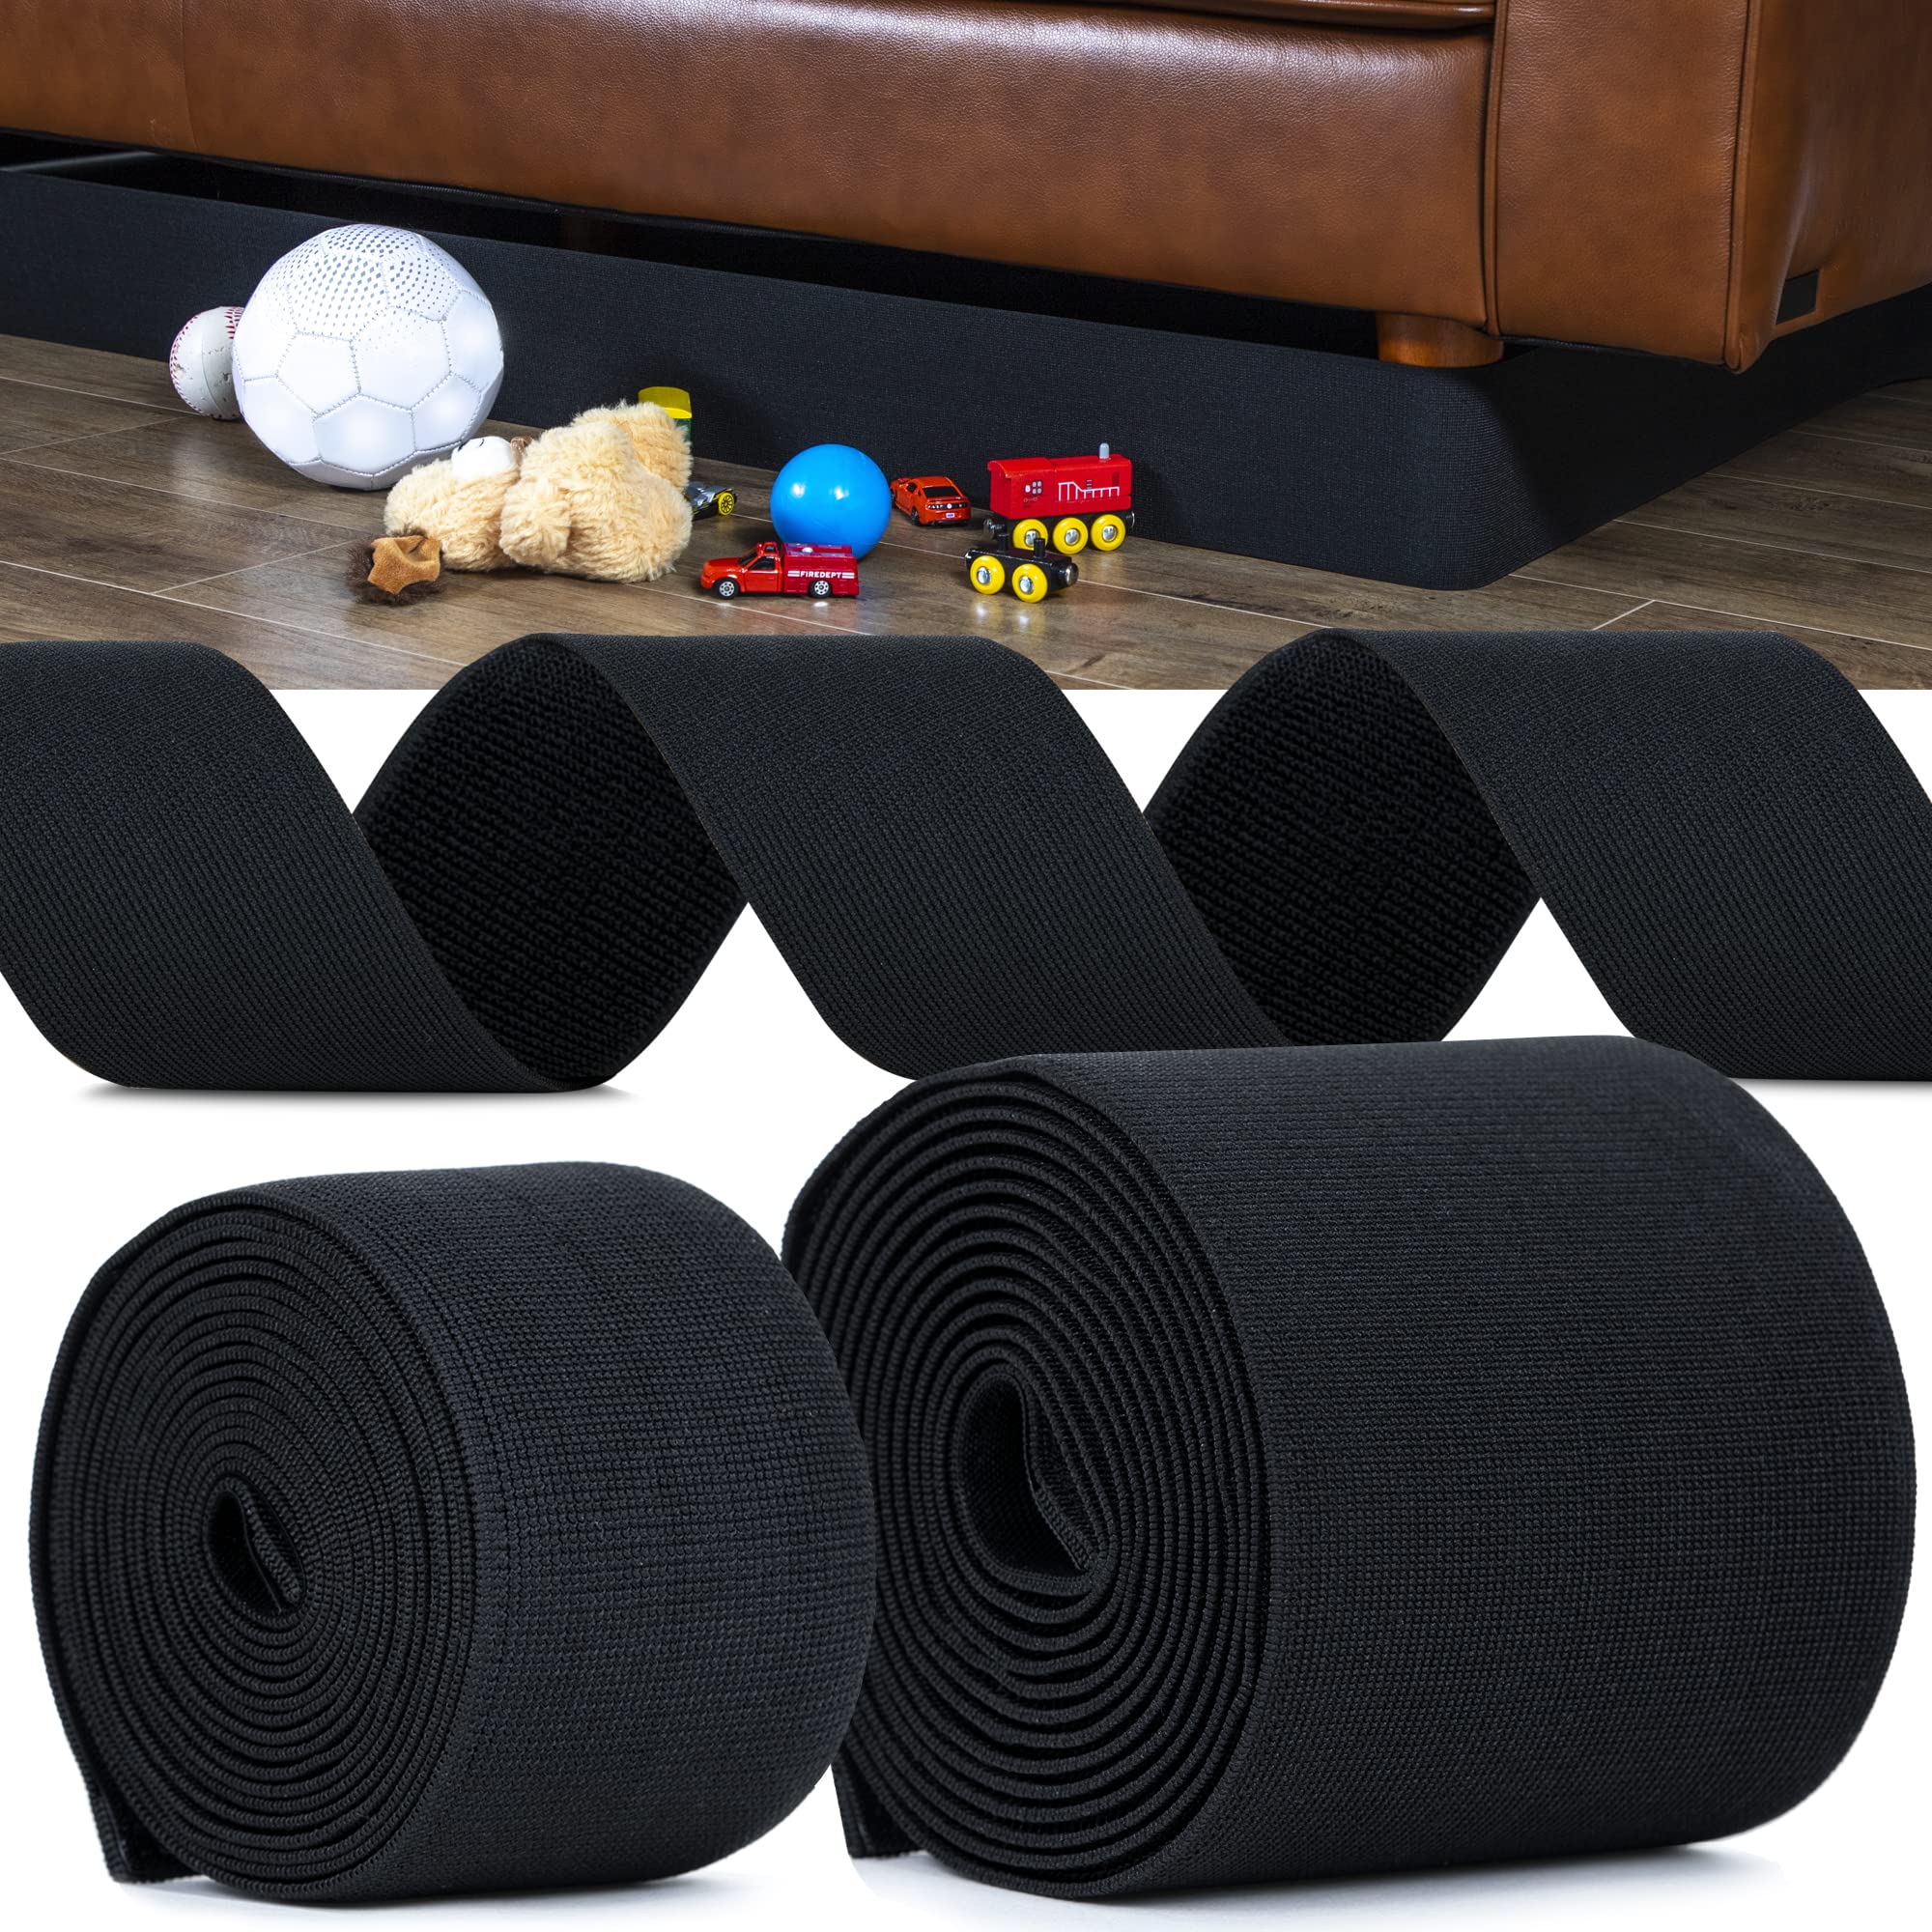 Phildahome Under Couch Blocker For Kid And Pet Toys, Toy